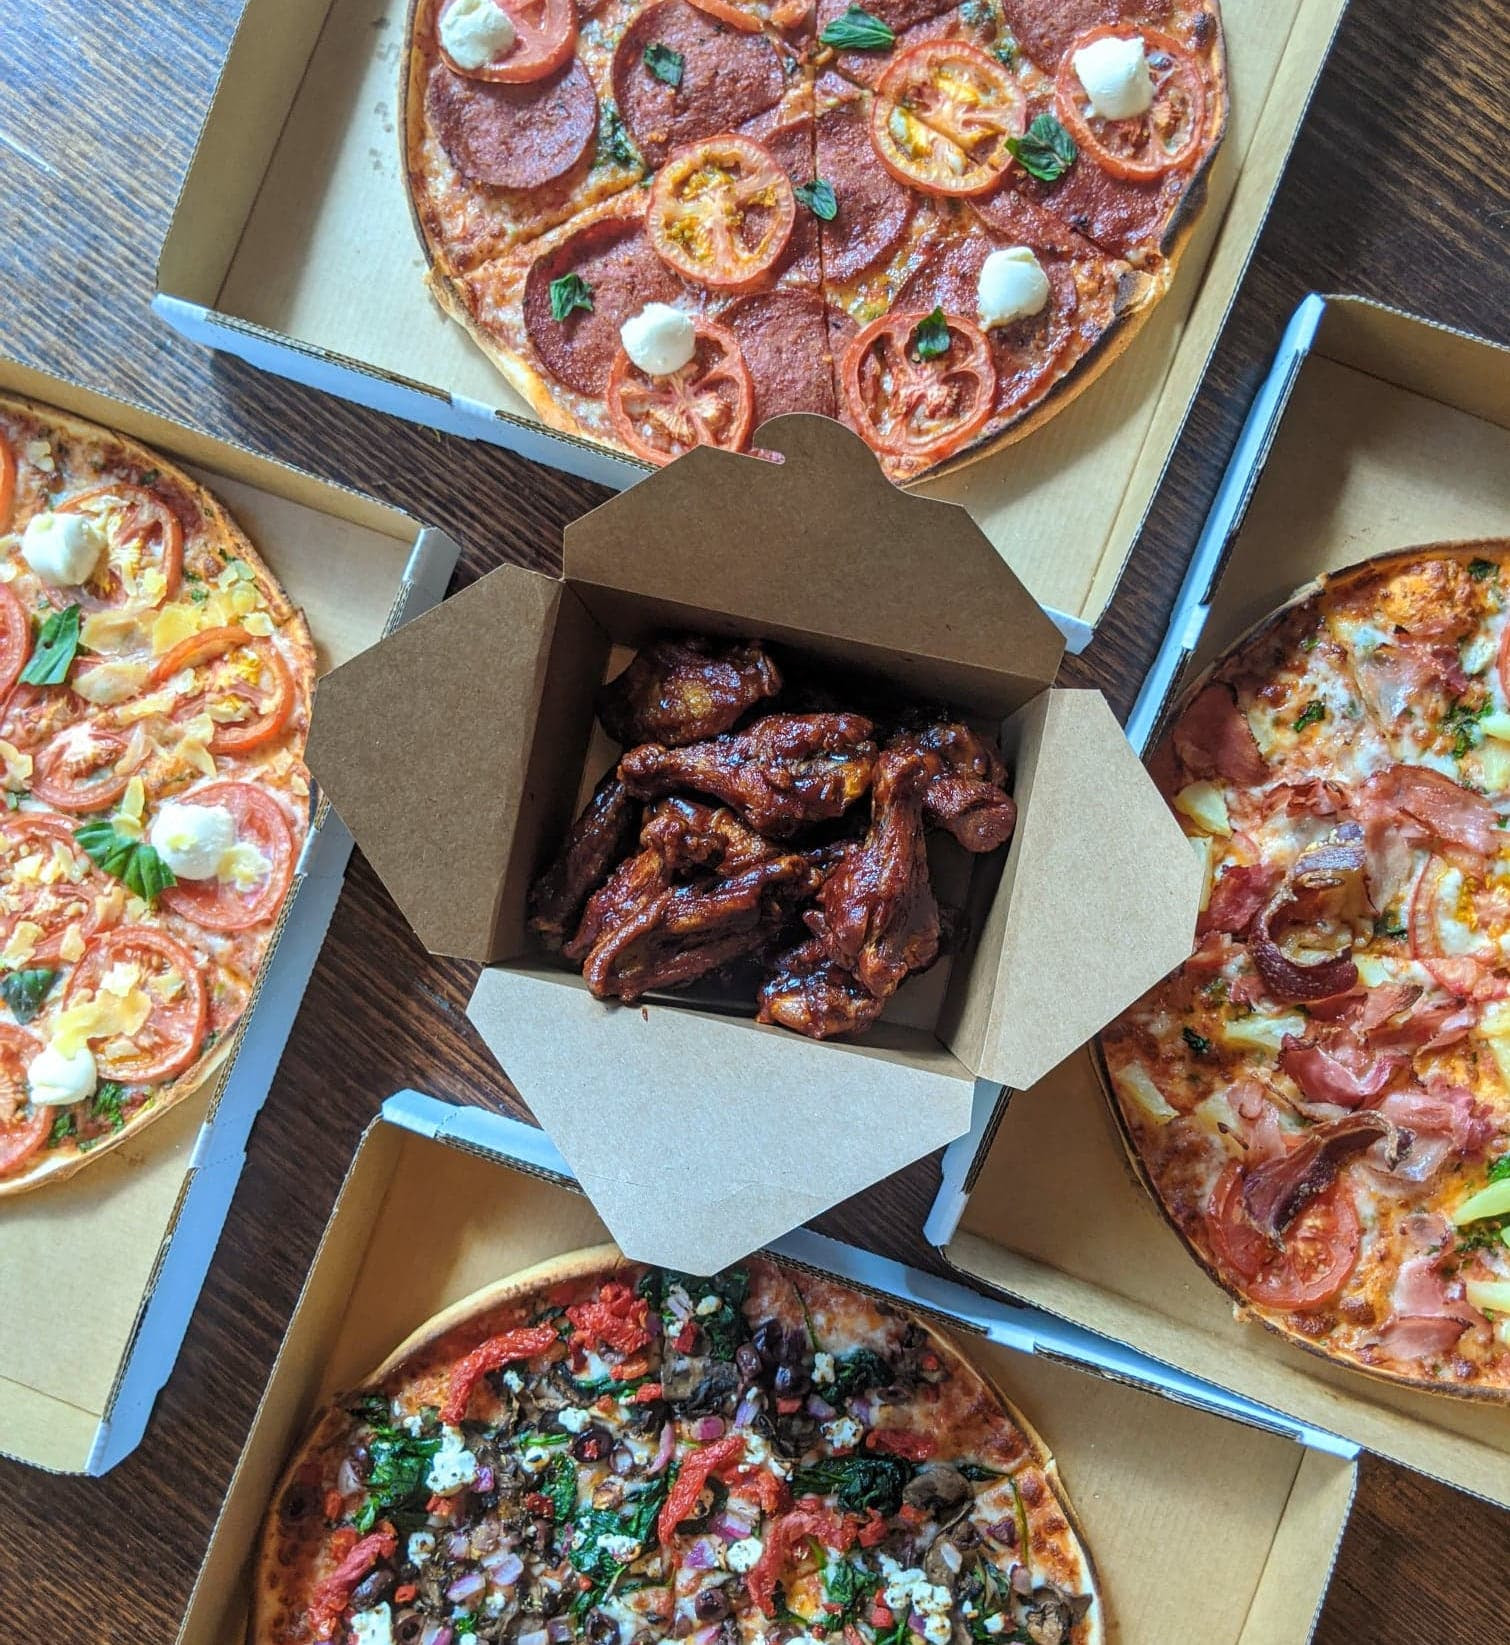 DEAL: Bondi Pizza - Free Smokey BBQ Chicken Wings with $35 Purchase via Online Orders (until 10 September 2020) 4